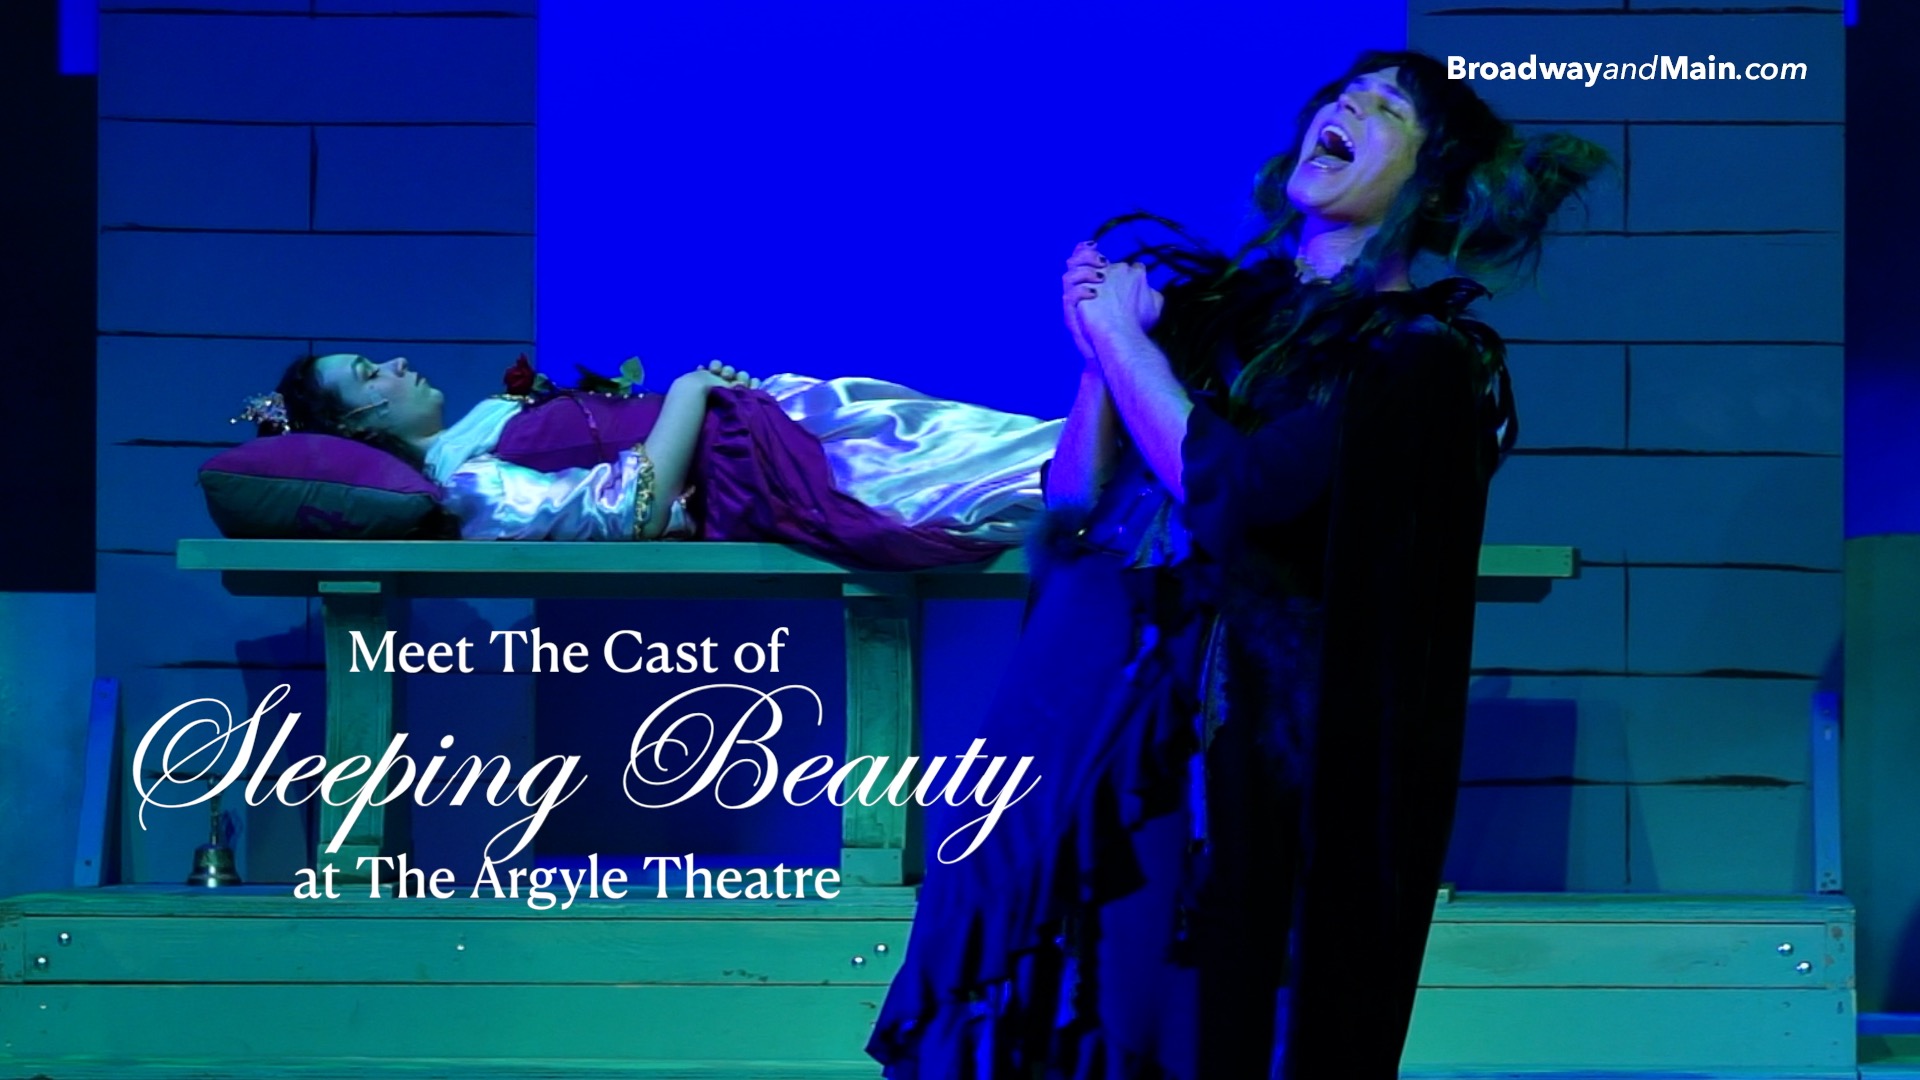 Meet The Cast of Sleeping Beauty at The Argyle Theatre